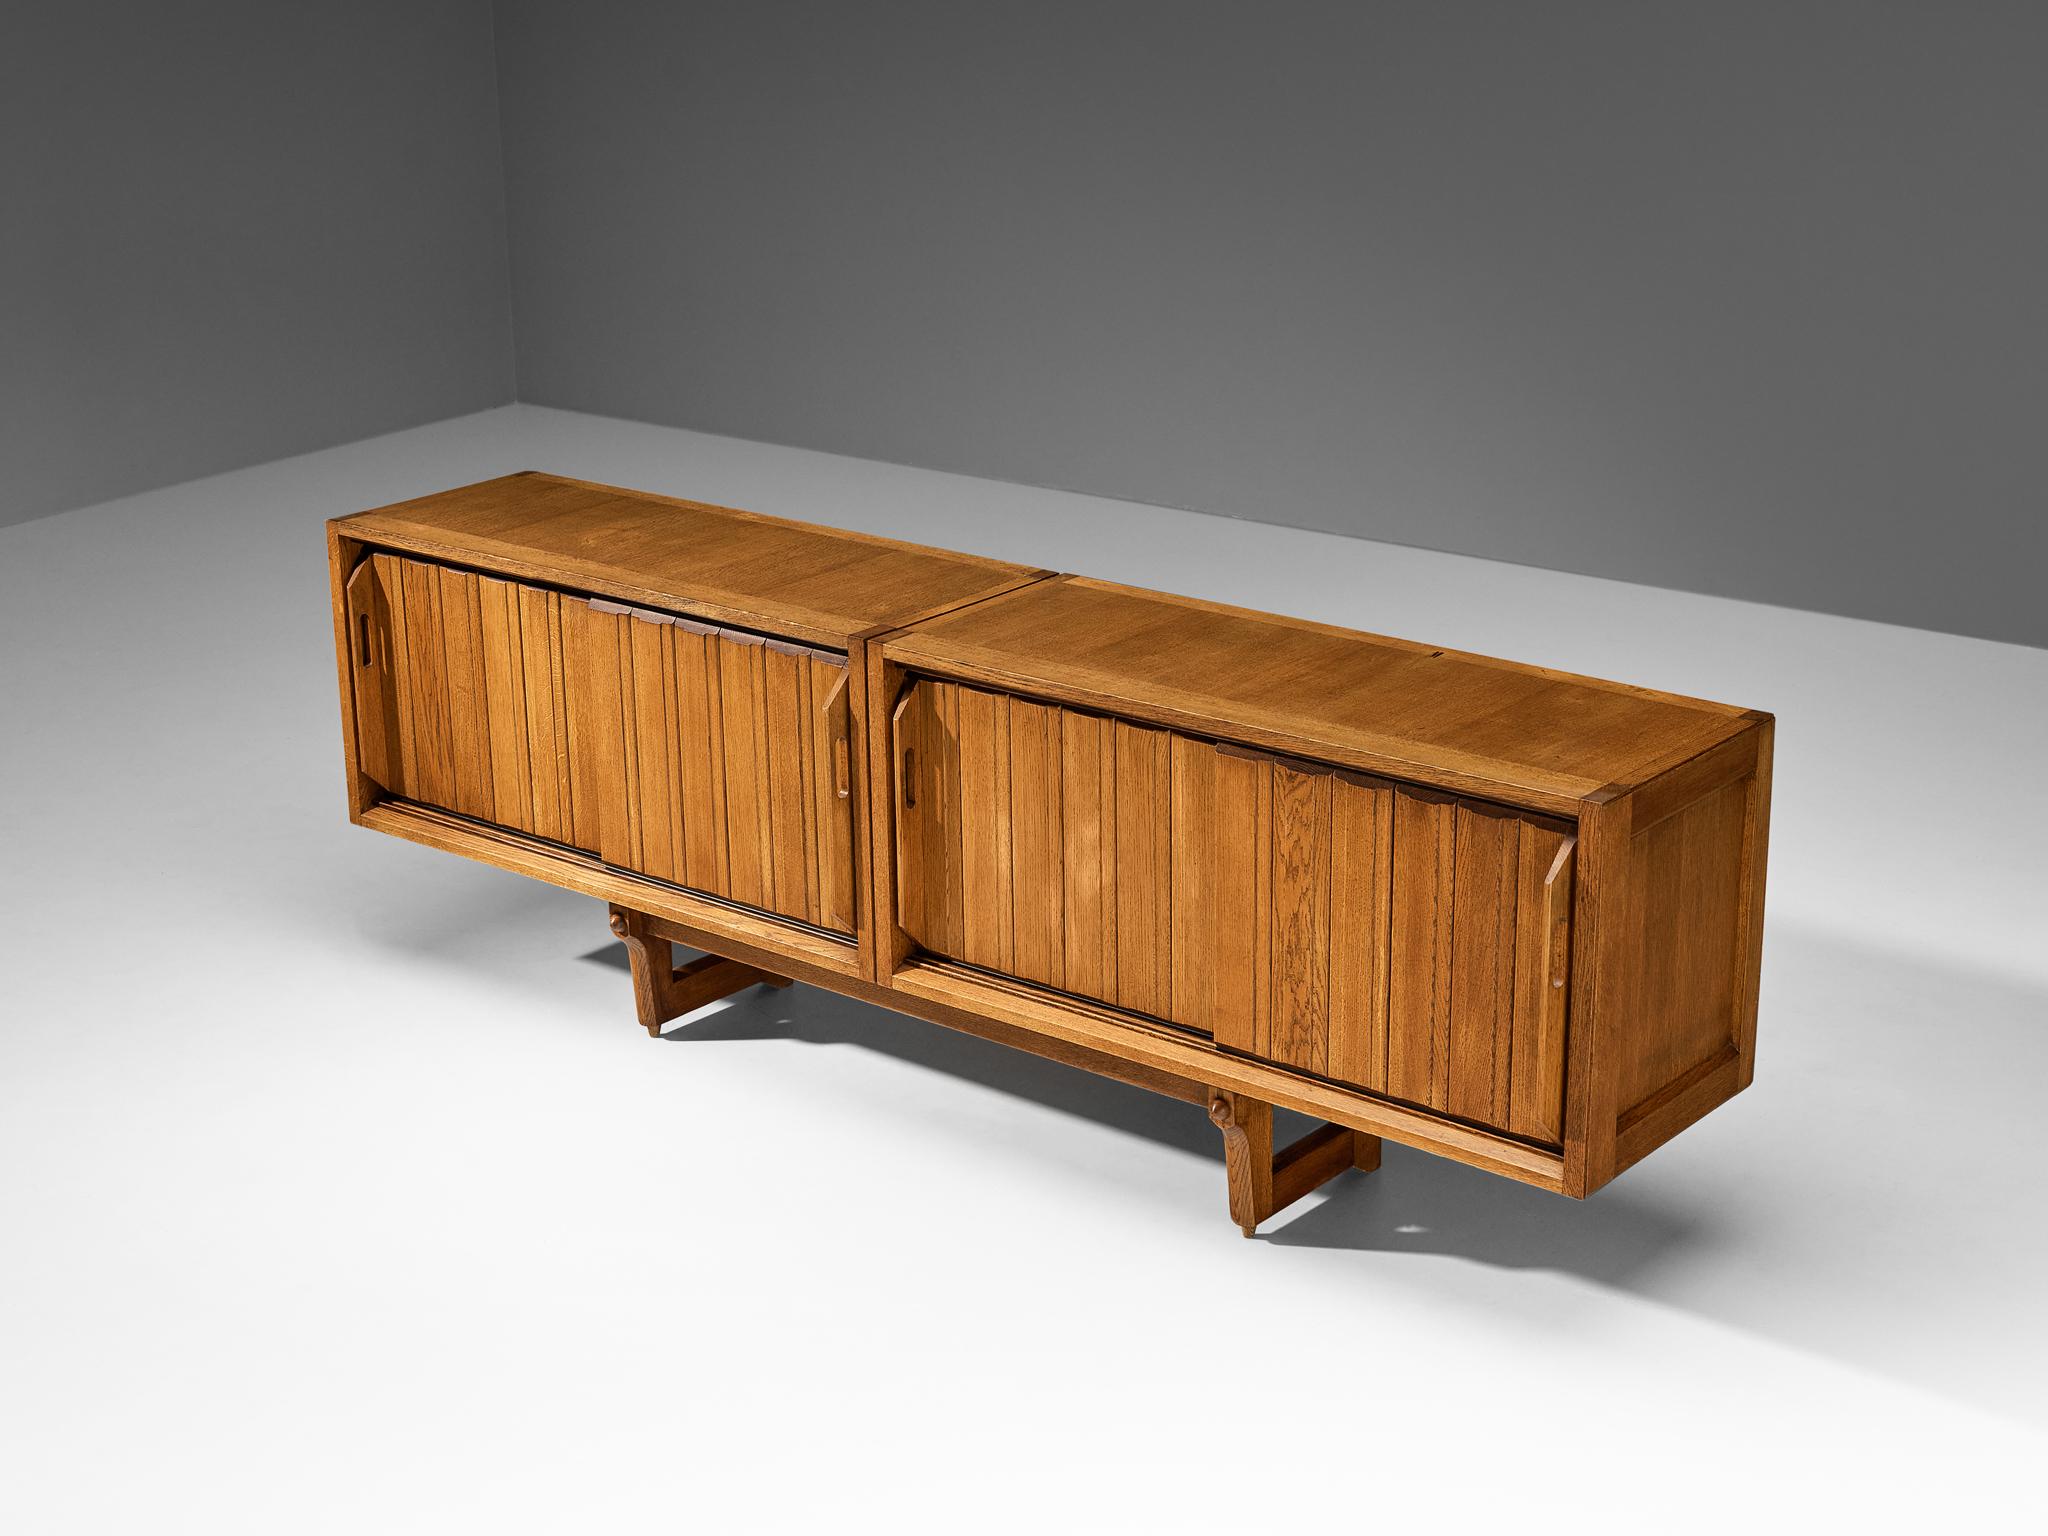 Guillerme et Chambron for Votre Maison, sideboard, oak, France, 1960s

This functional and large sideboard is based on a well-designed structure where aesthetics and functionally come hand in hand. The front holds the characteristics of the French